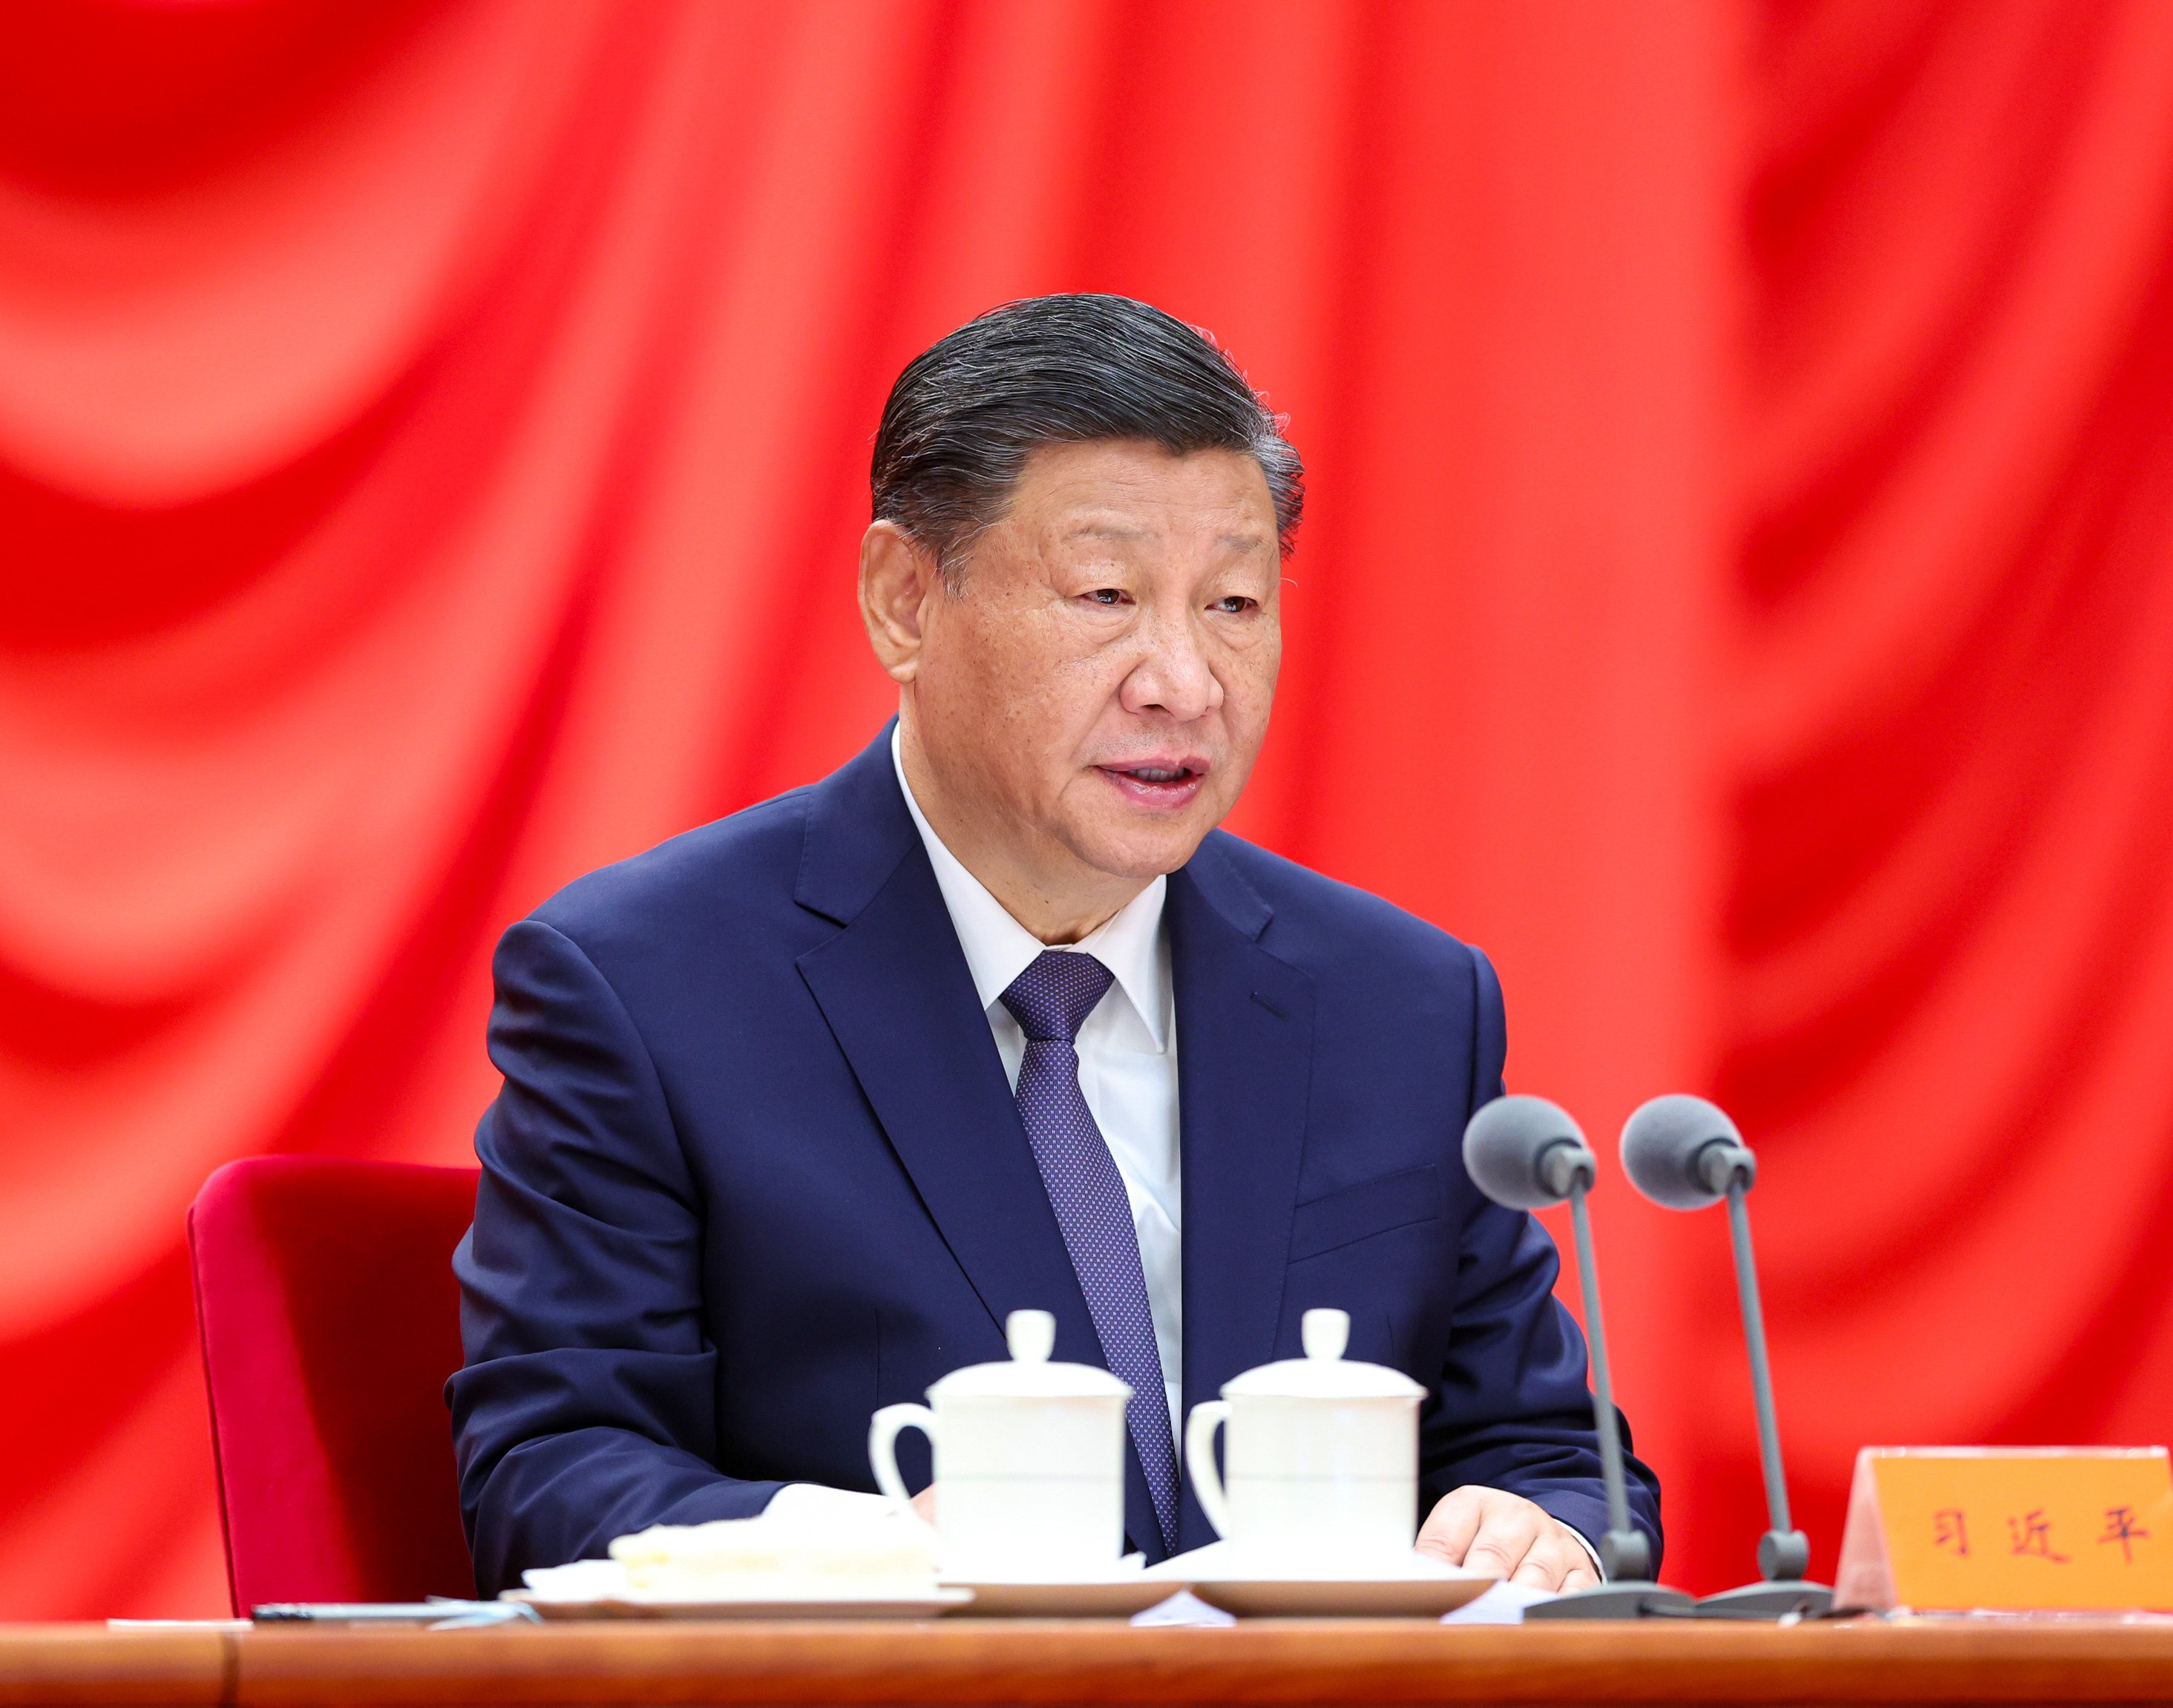 The Politburo meeting included discussions on the study of Xi Jinping’s political philosophy. Photo: Xinhua